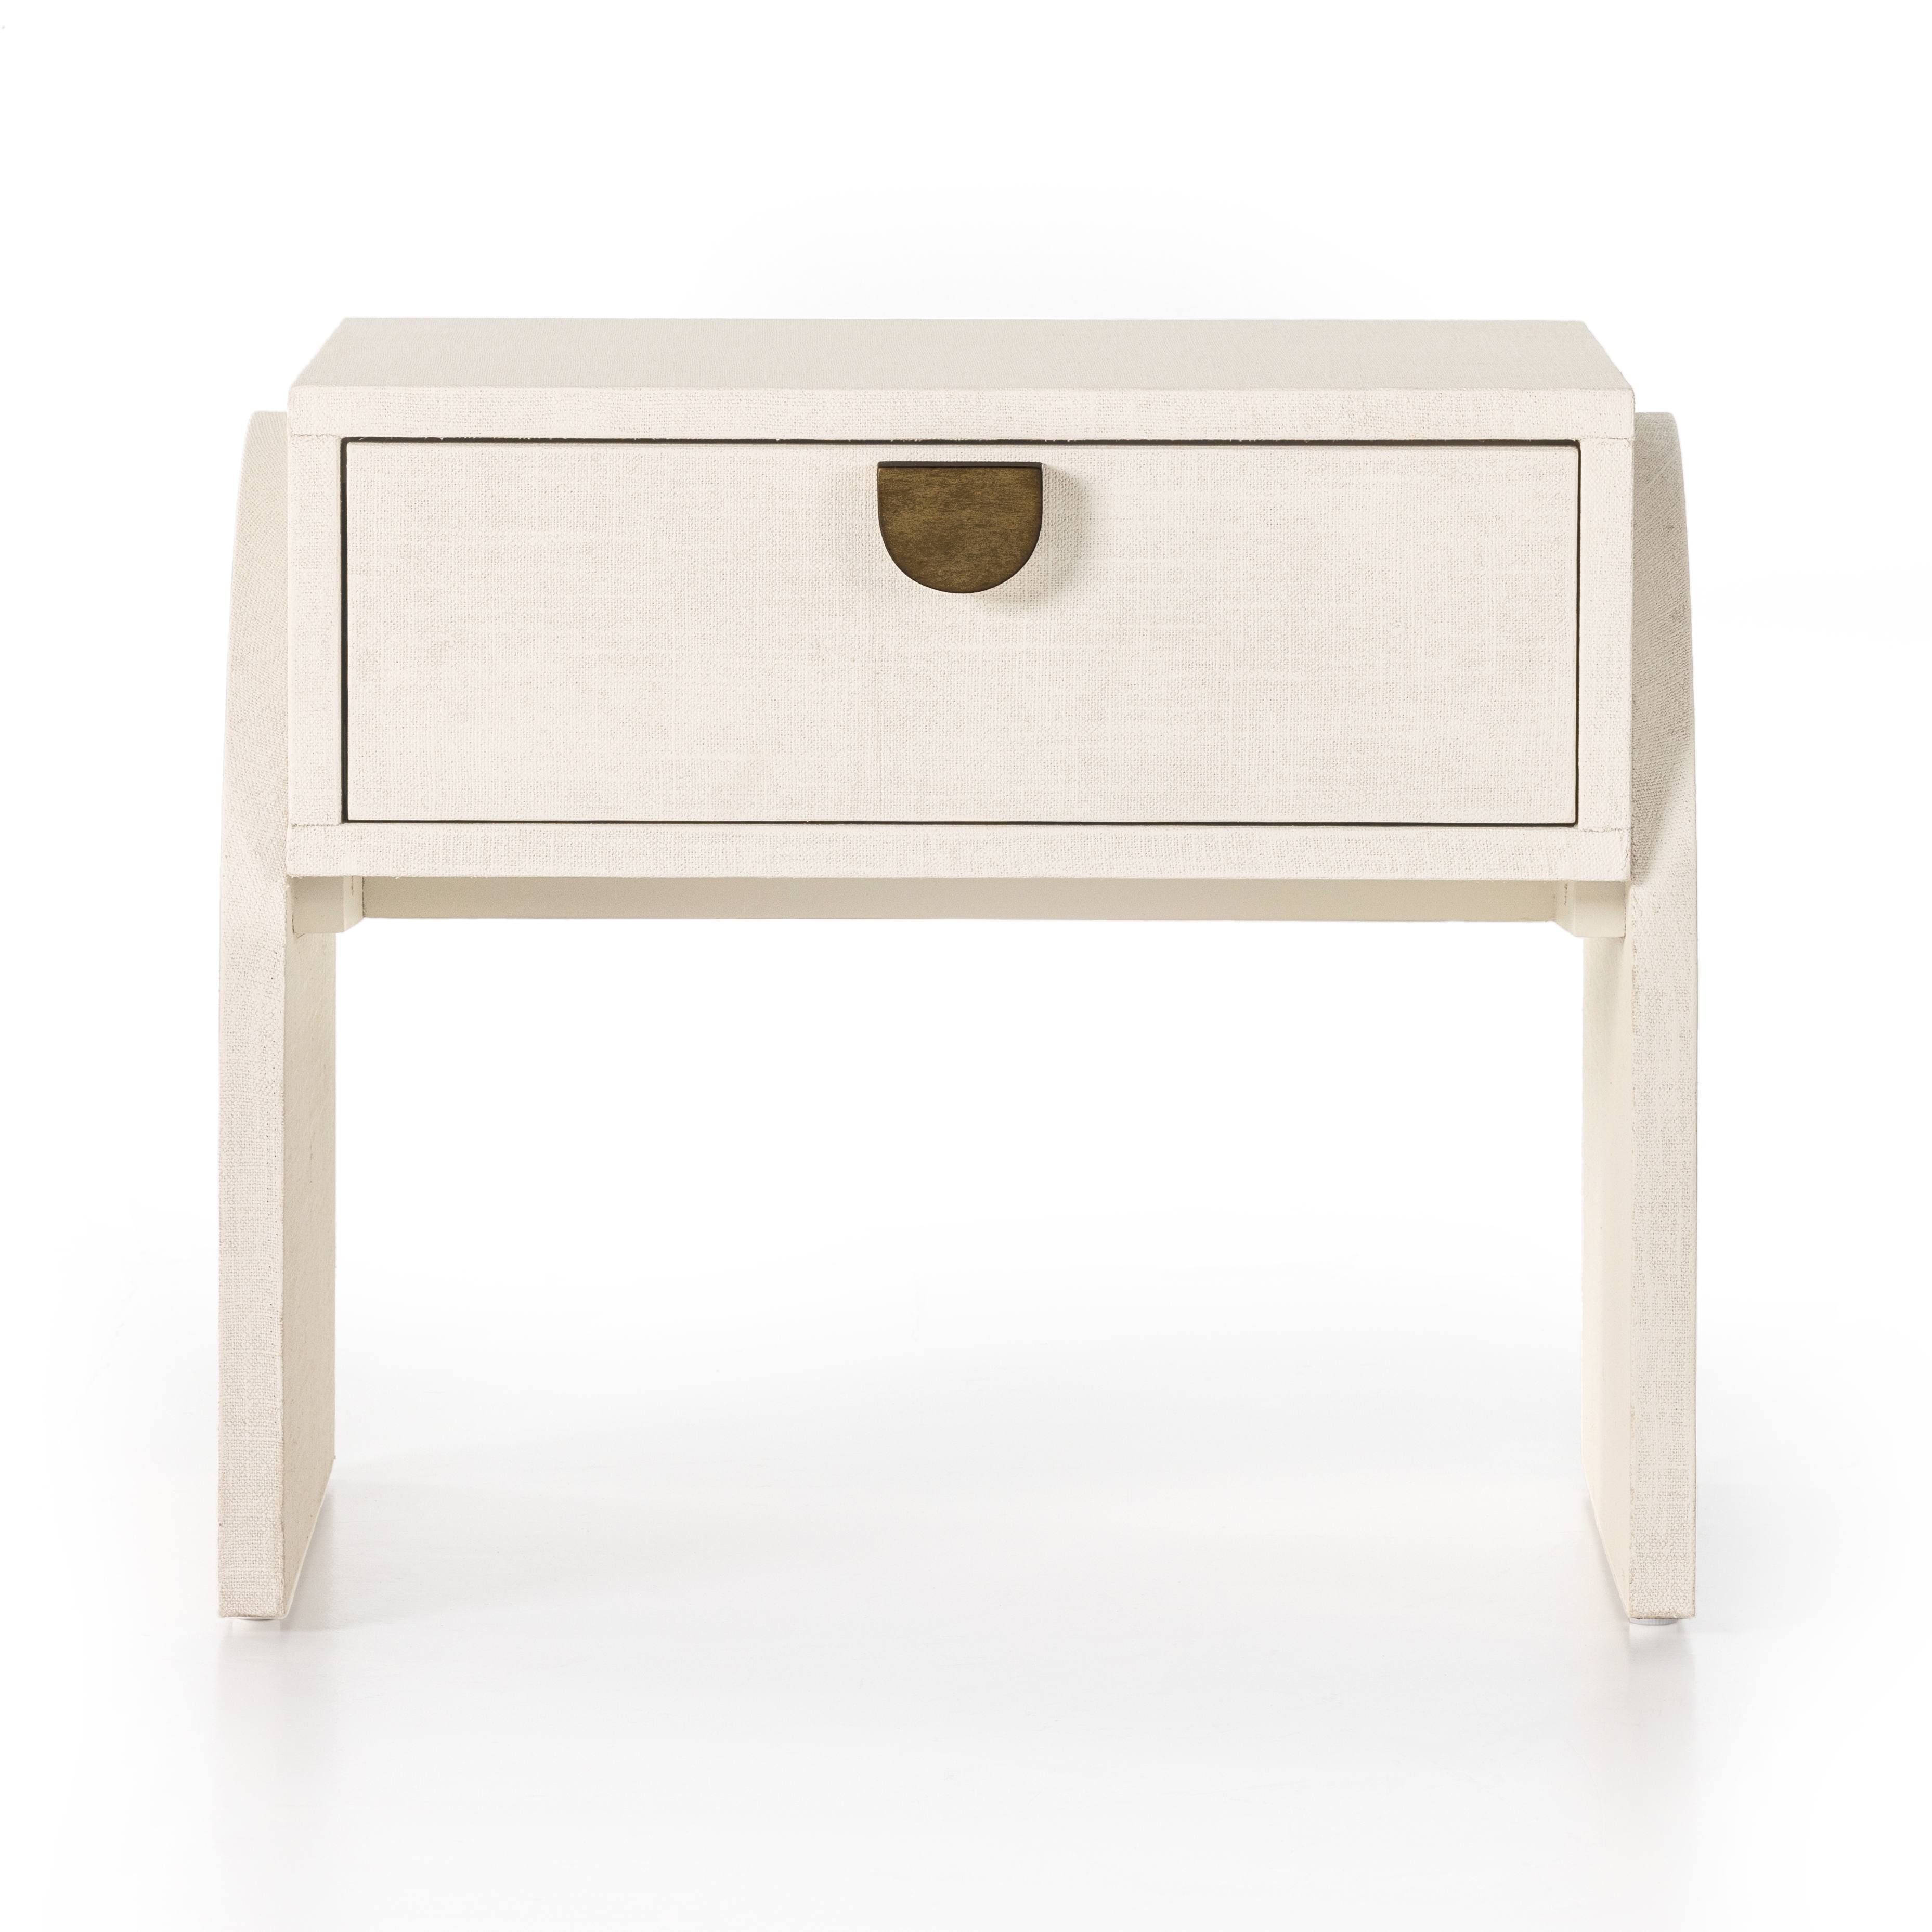 Cressida End Table-Ivory Painted Linen - Image 3